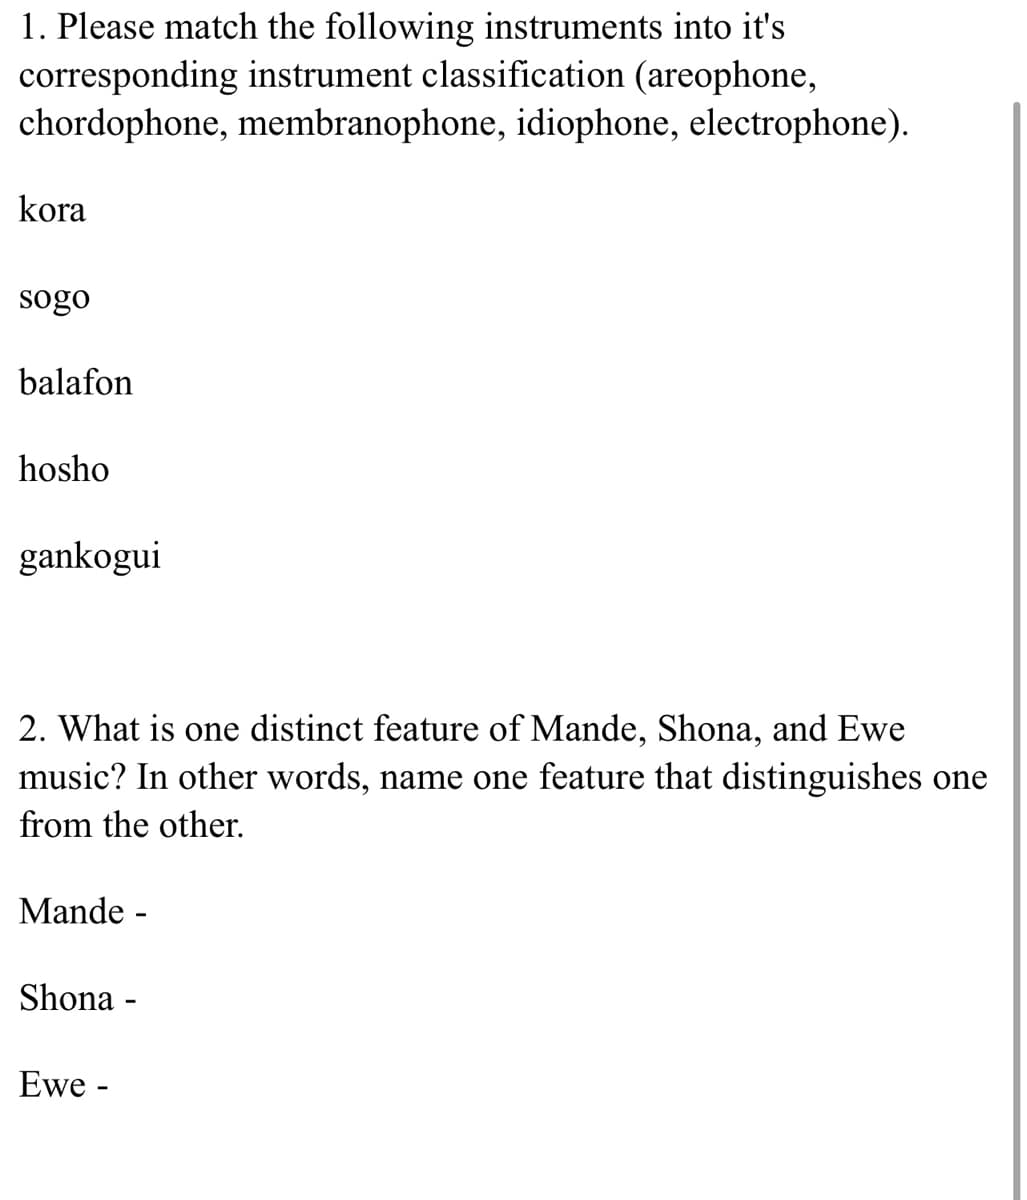 1. Please match the following instruments into it's
corresponding instrument classification (areophone,
chordophone, membranophone, idiophone, electrophone).
kora
sogo
balafon
hosho
gankogui
2. What is one distinct feature of Mande, Shona, and Ewe
music? In other words, name one feature that distinguishes one
from the other.
Mande -
Shona -
Ewe -
